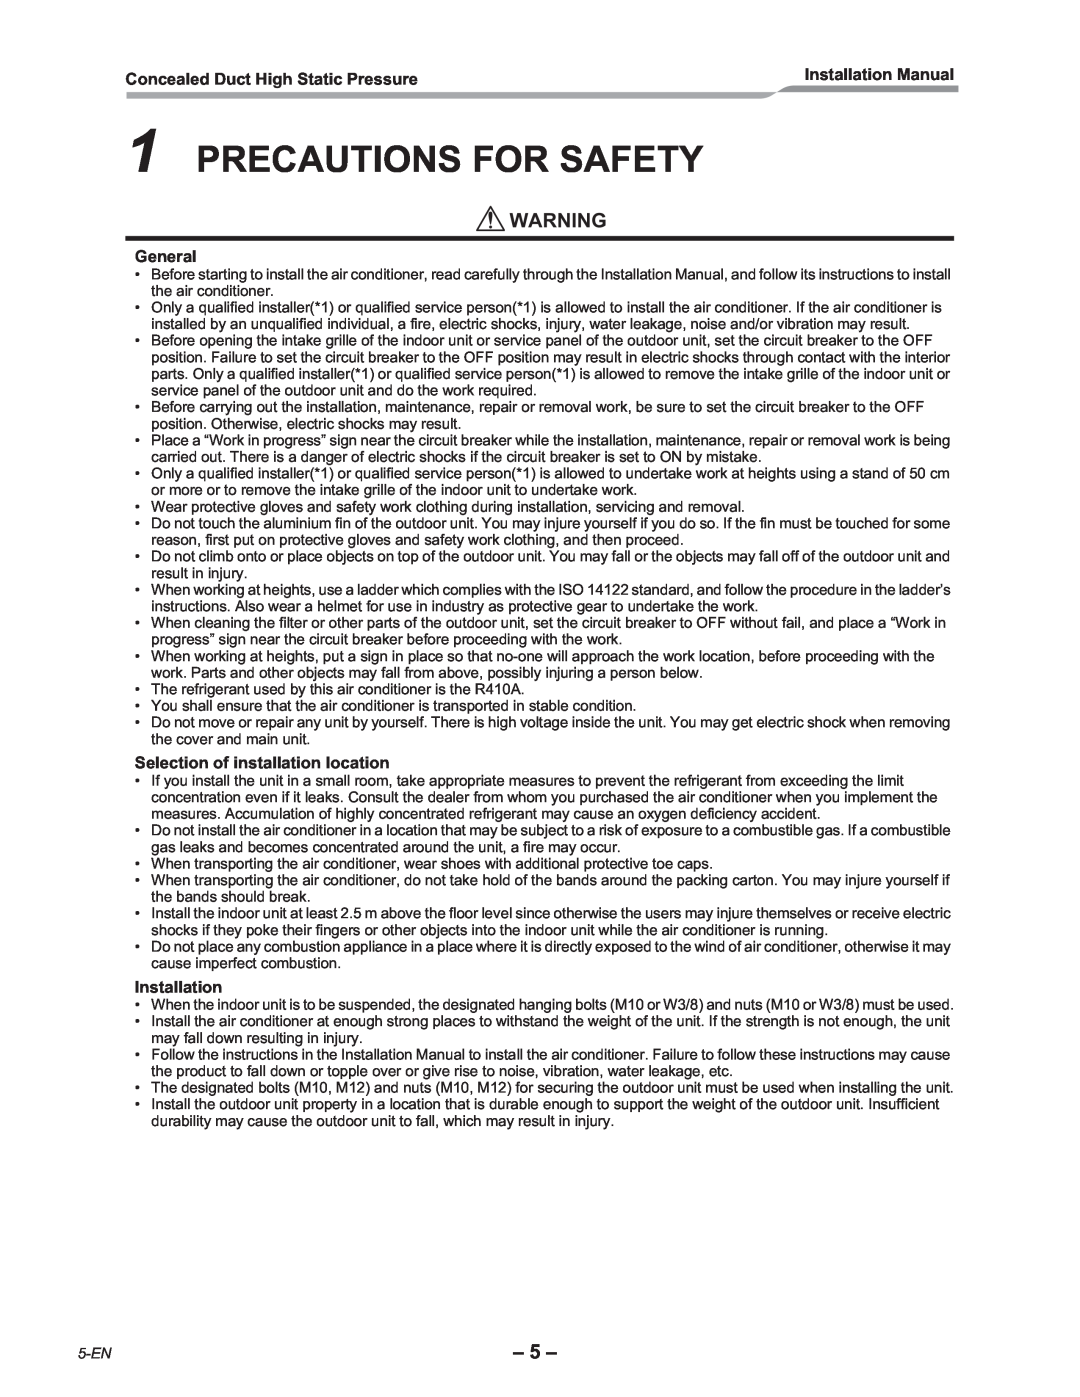 Toshiba RAV-SM2802DT-E Precautions For Safety, Concealed Duct High Static Pressure, Installation Manual, General, 5-EN 